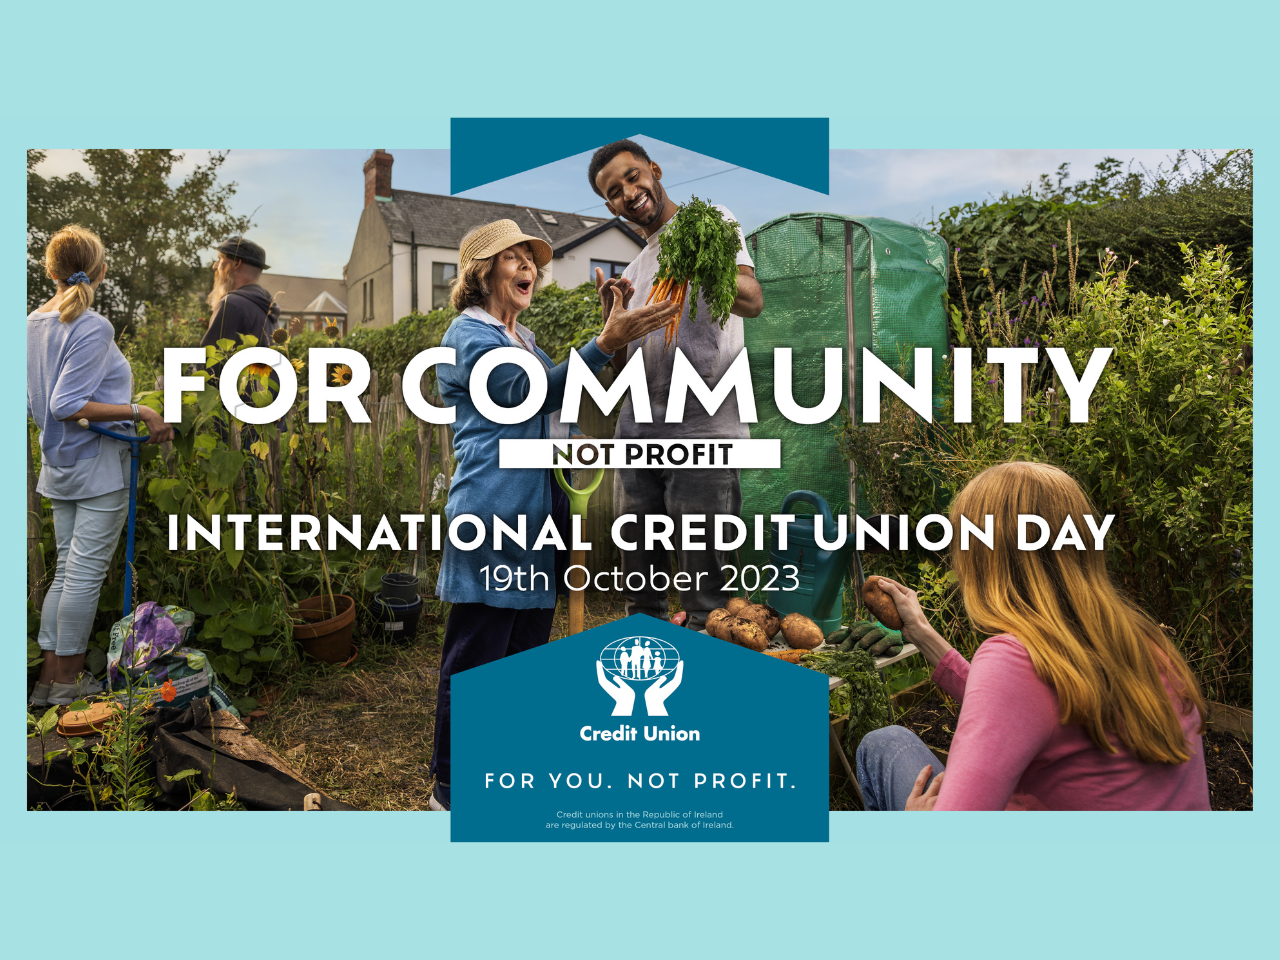 International Credit Union Day 2023 Facebook Giveaway CLOSED